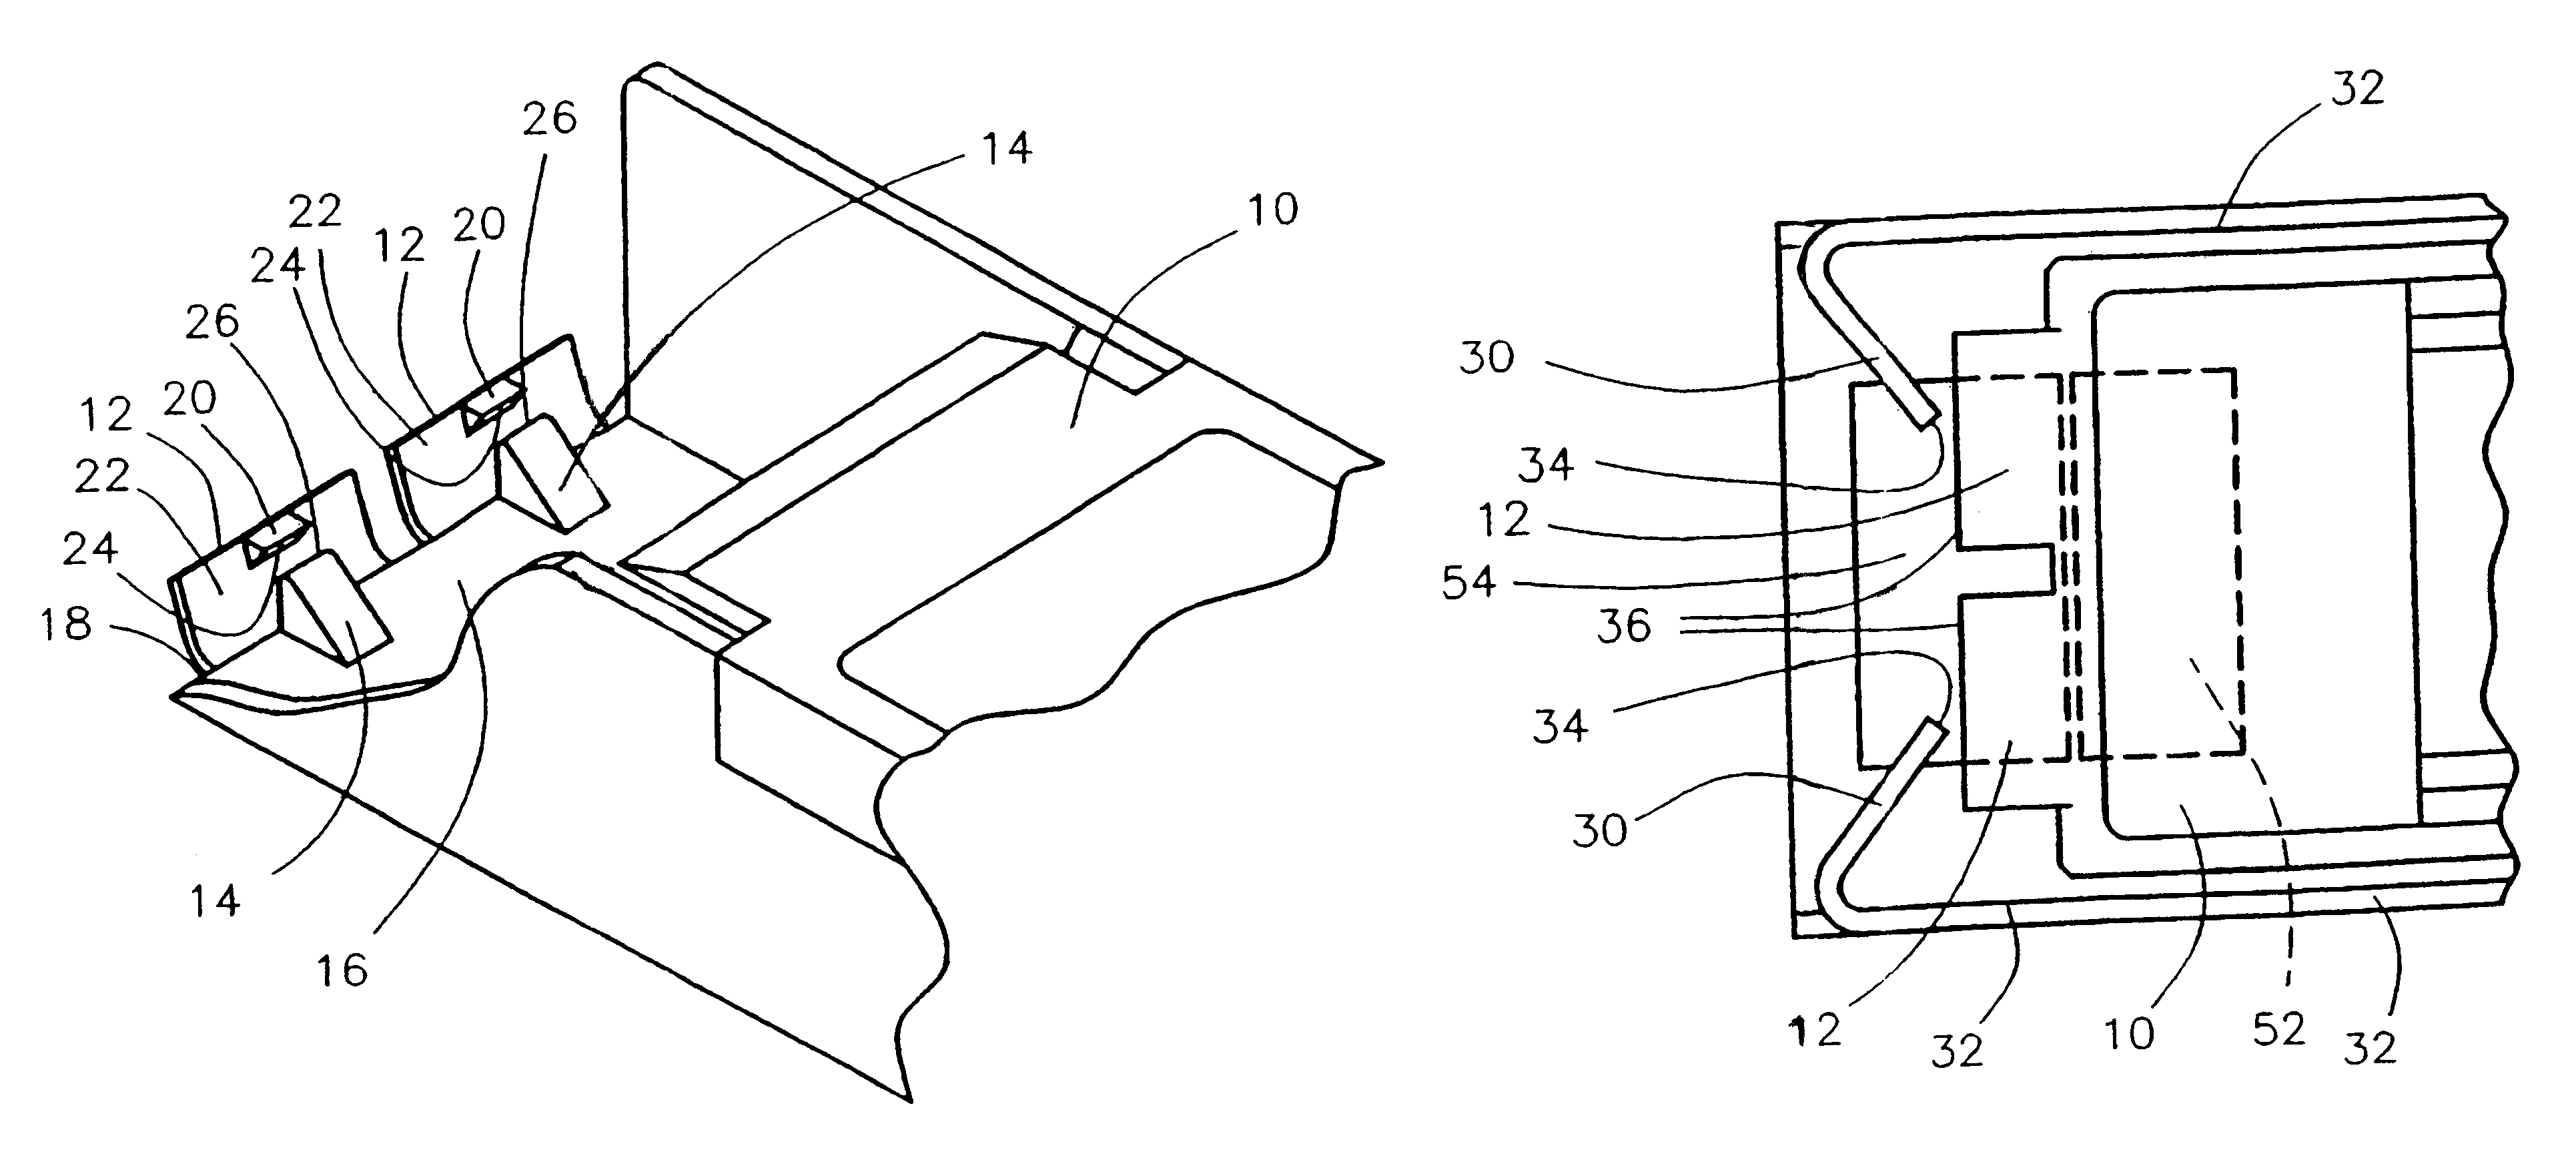 Enhanced module kick-out spring mechanism for removable small form factor optical transceivers